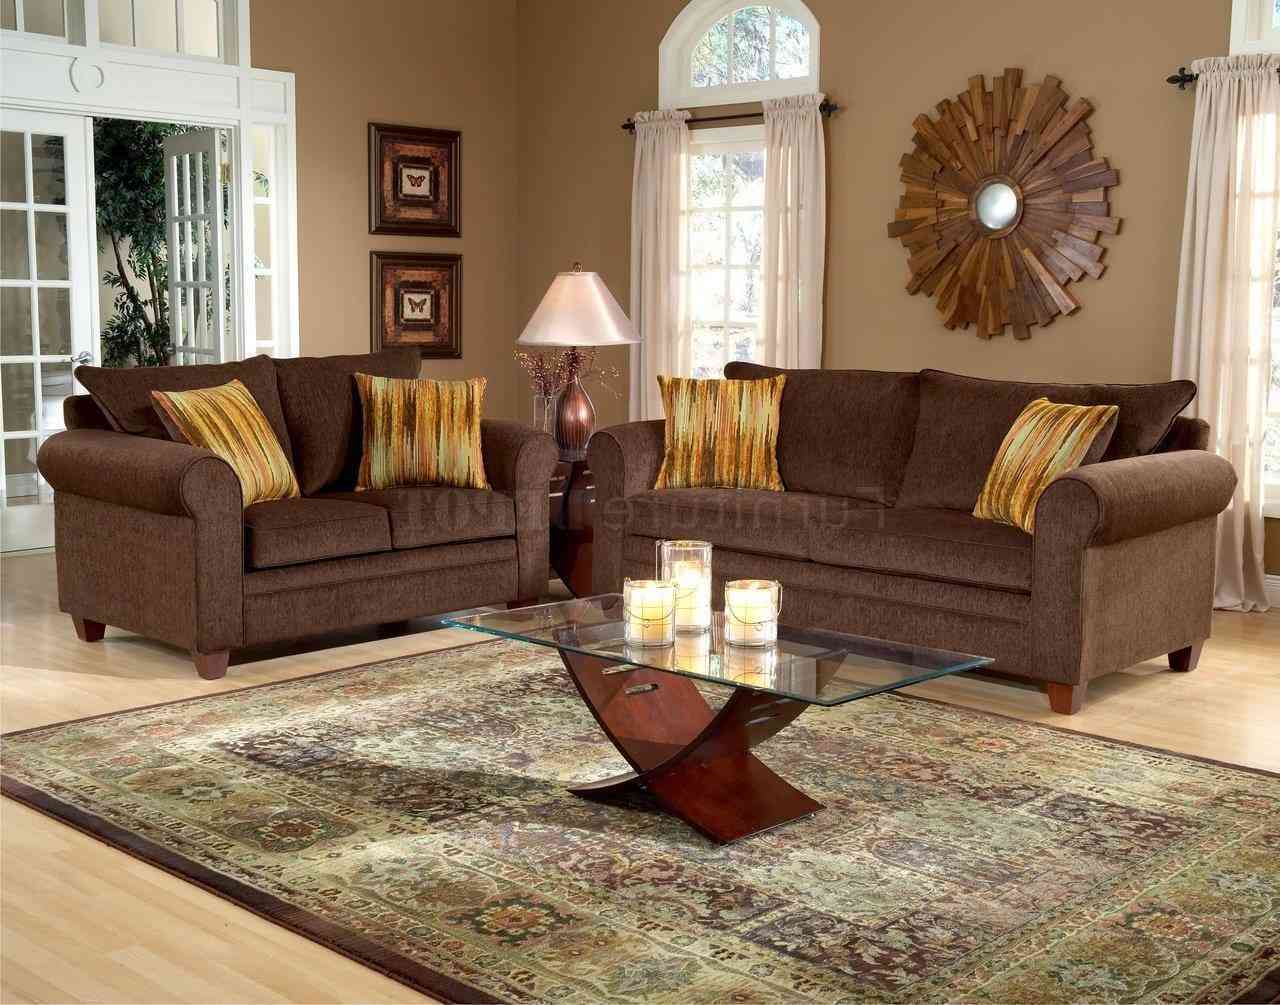 House Revivals: How to Decorate With a Brown Sofa